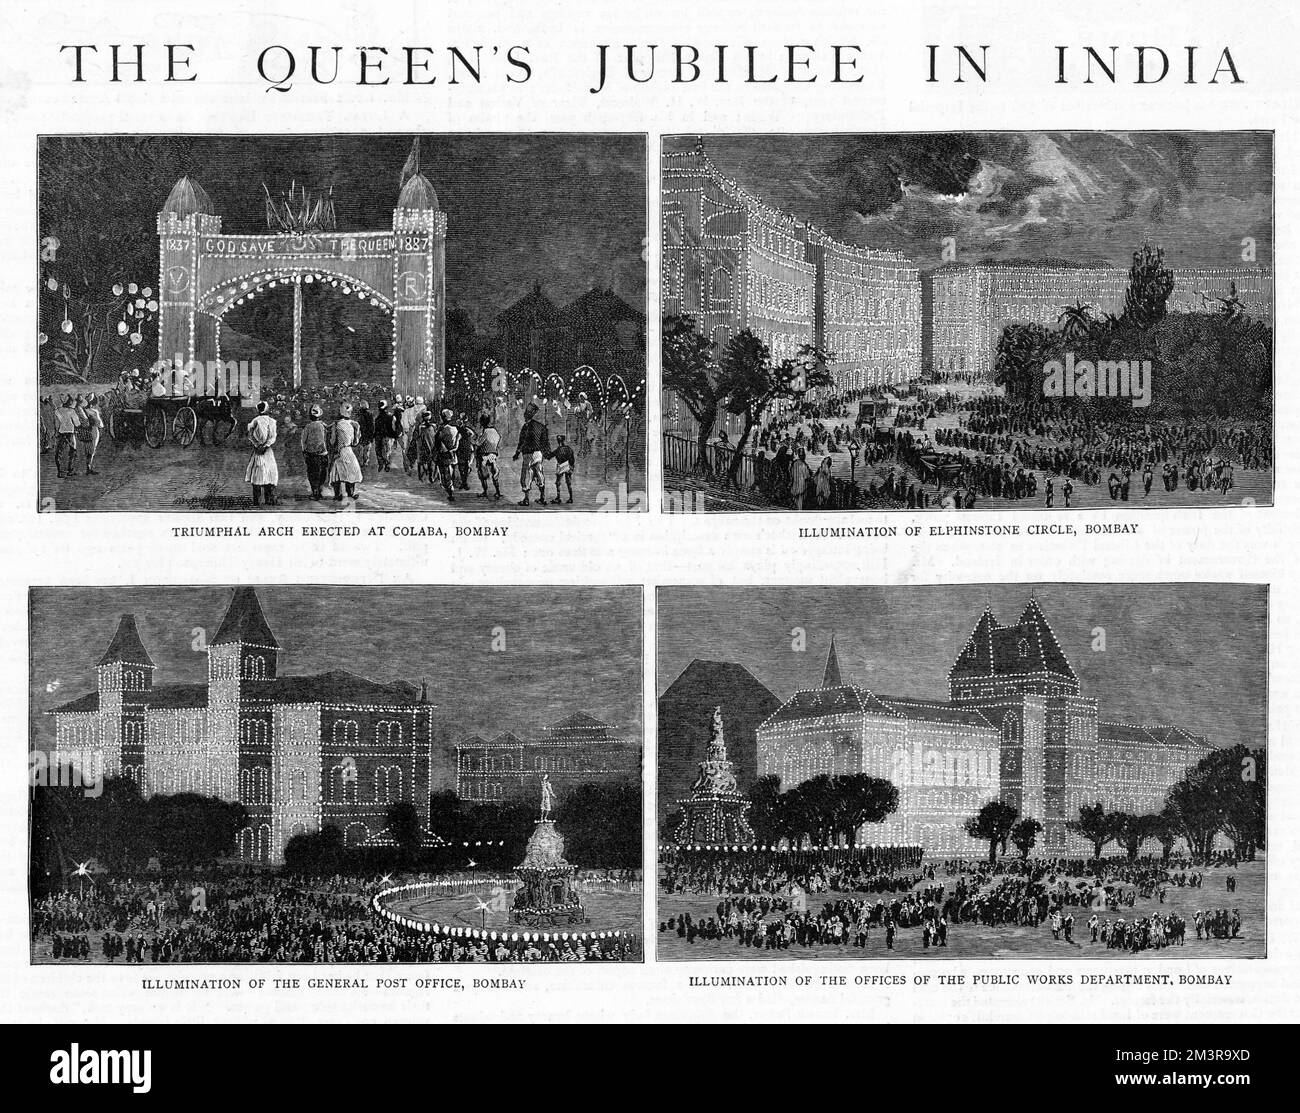 Mumbai - The Triumphal Arch at Colaba, The illuminations on the  Elphinstone Circle, the illuminations on the General Post Office and the illuminations on the Offices of the Public Works Department. Decorations to celebrate Queen Victoria's Golden Jubilee (celebrated in June 1887).     Date: 1887 Stock Photo